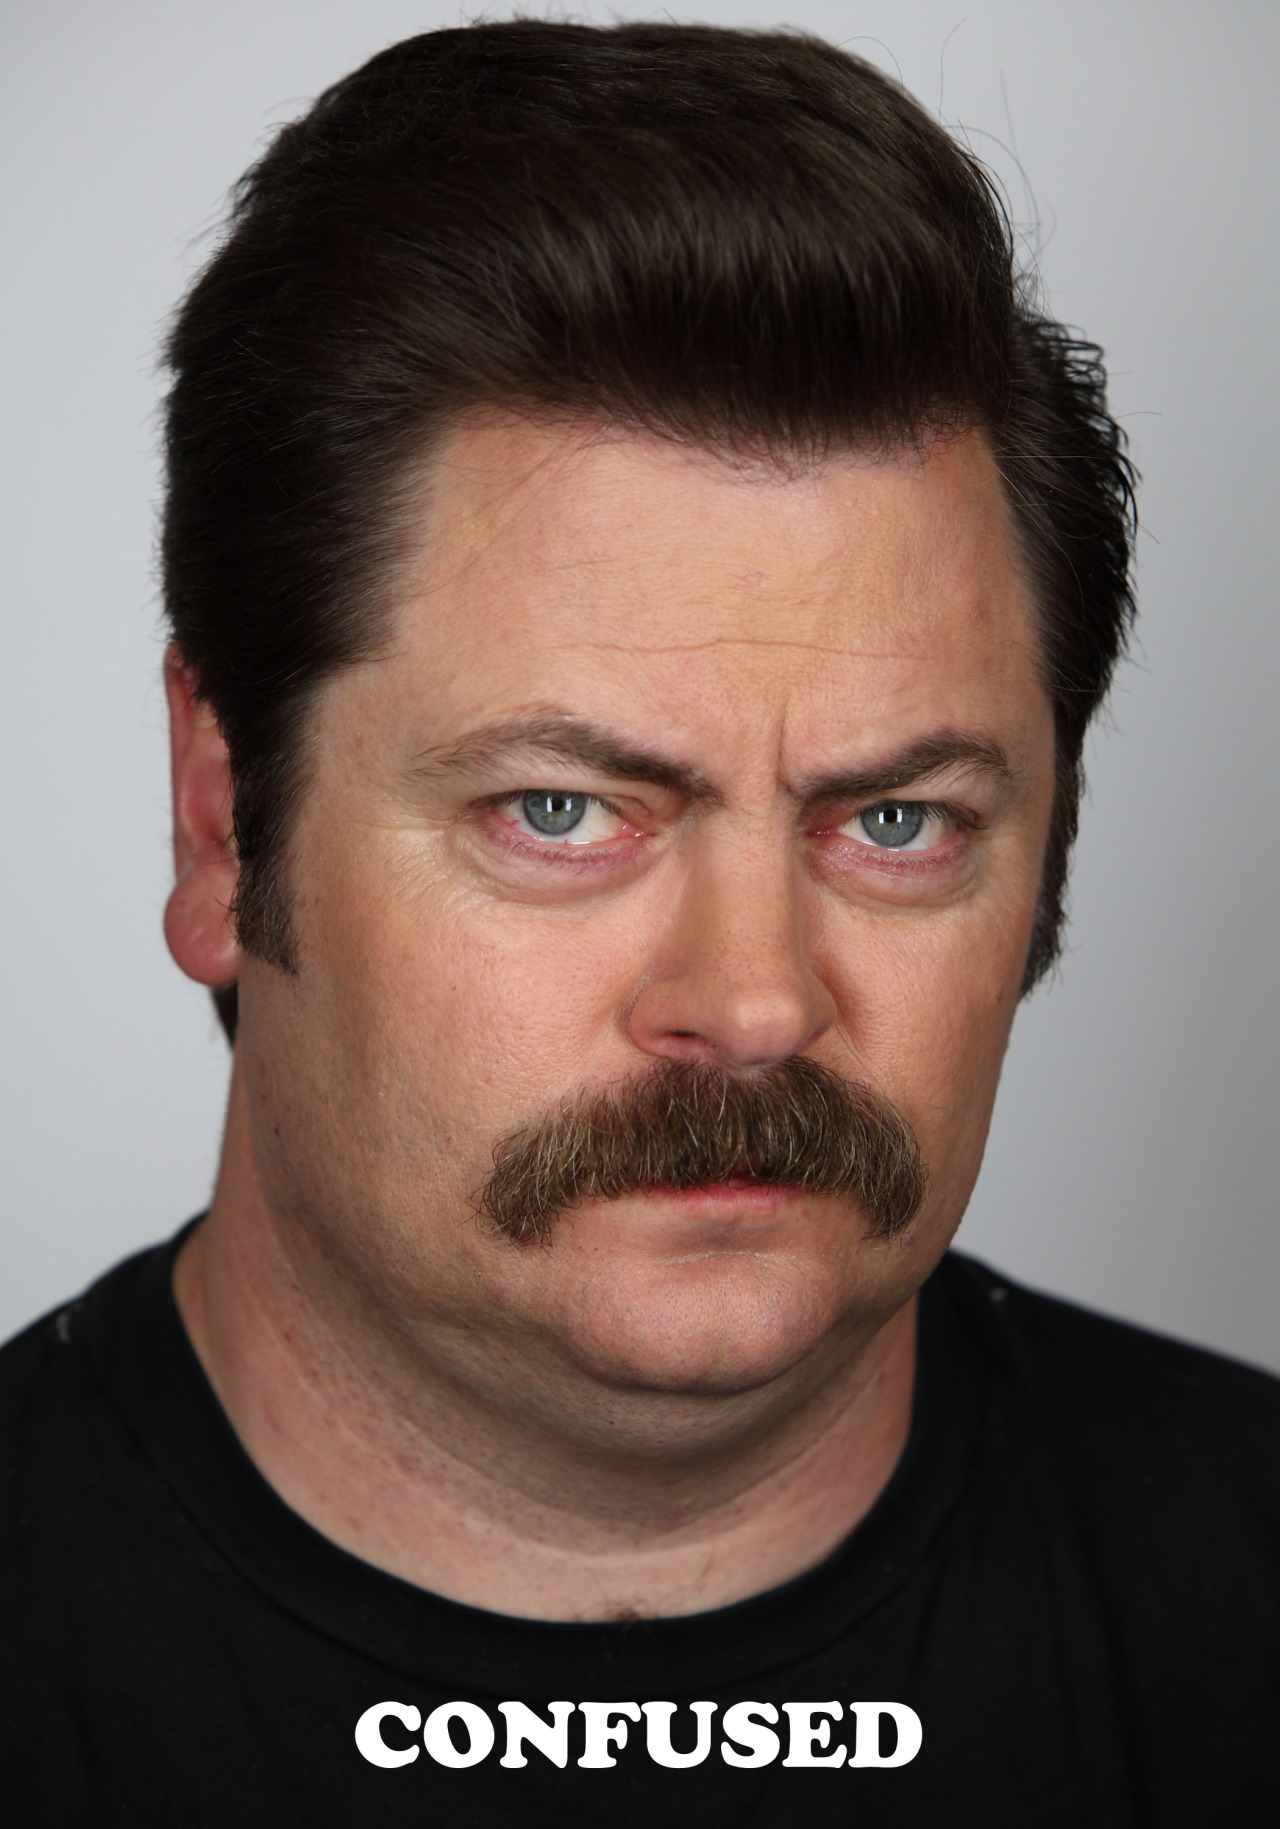 A picture of Ron Swanson with the caption 